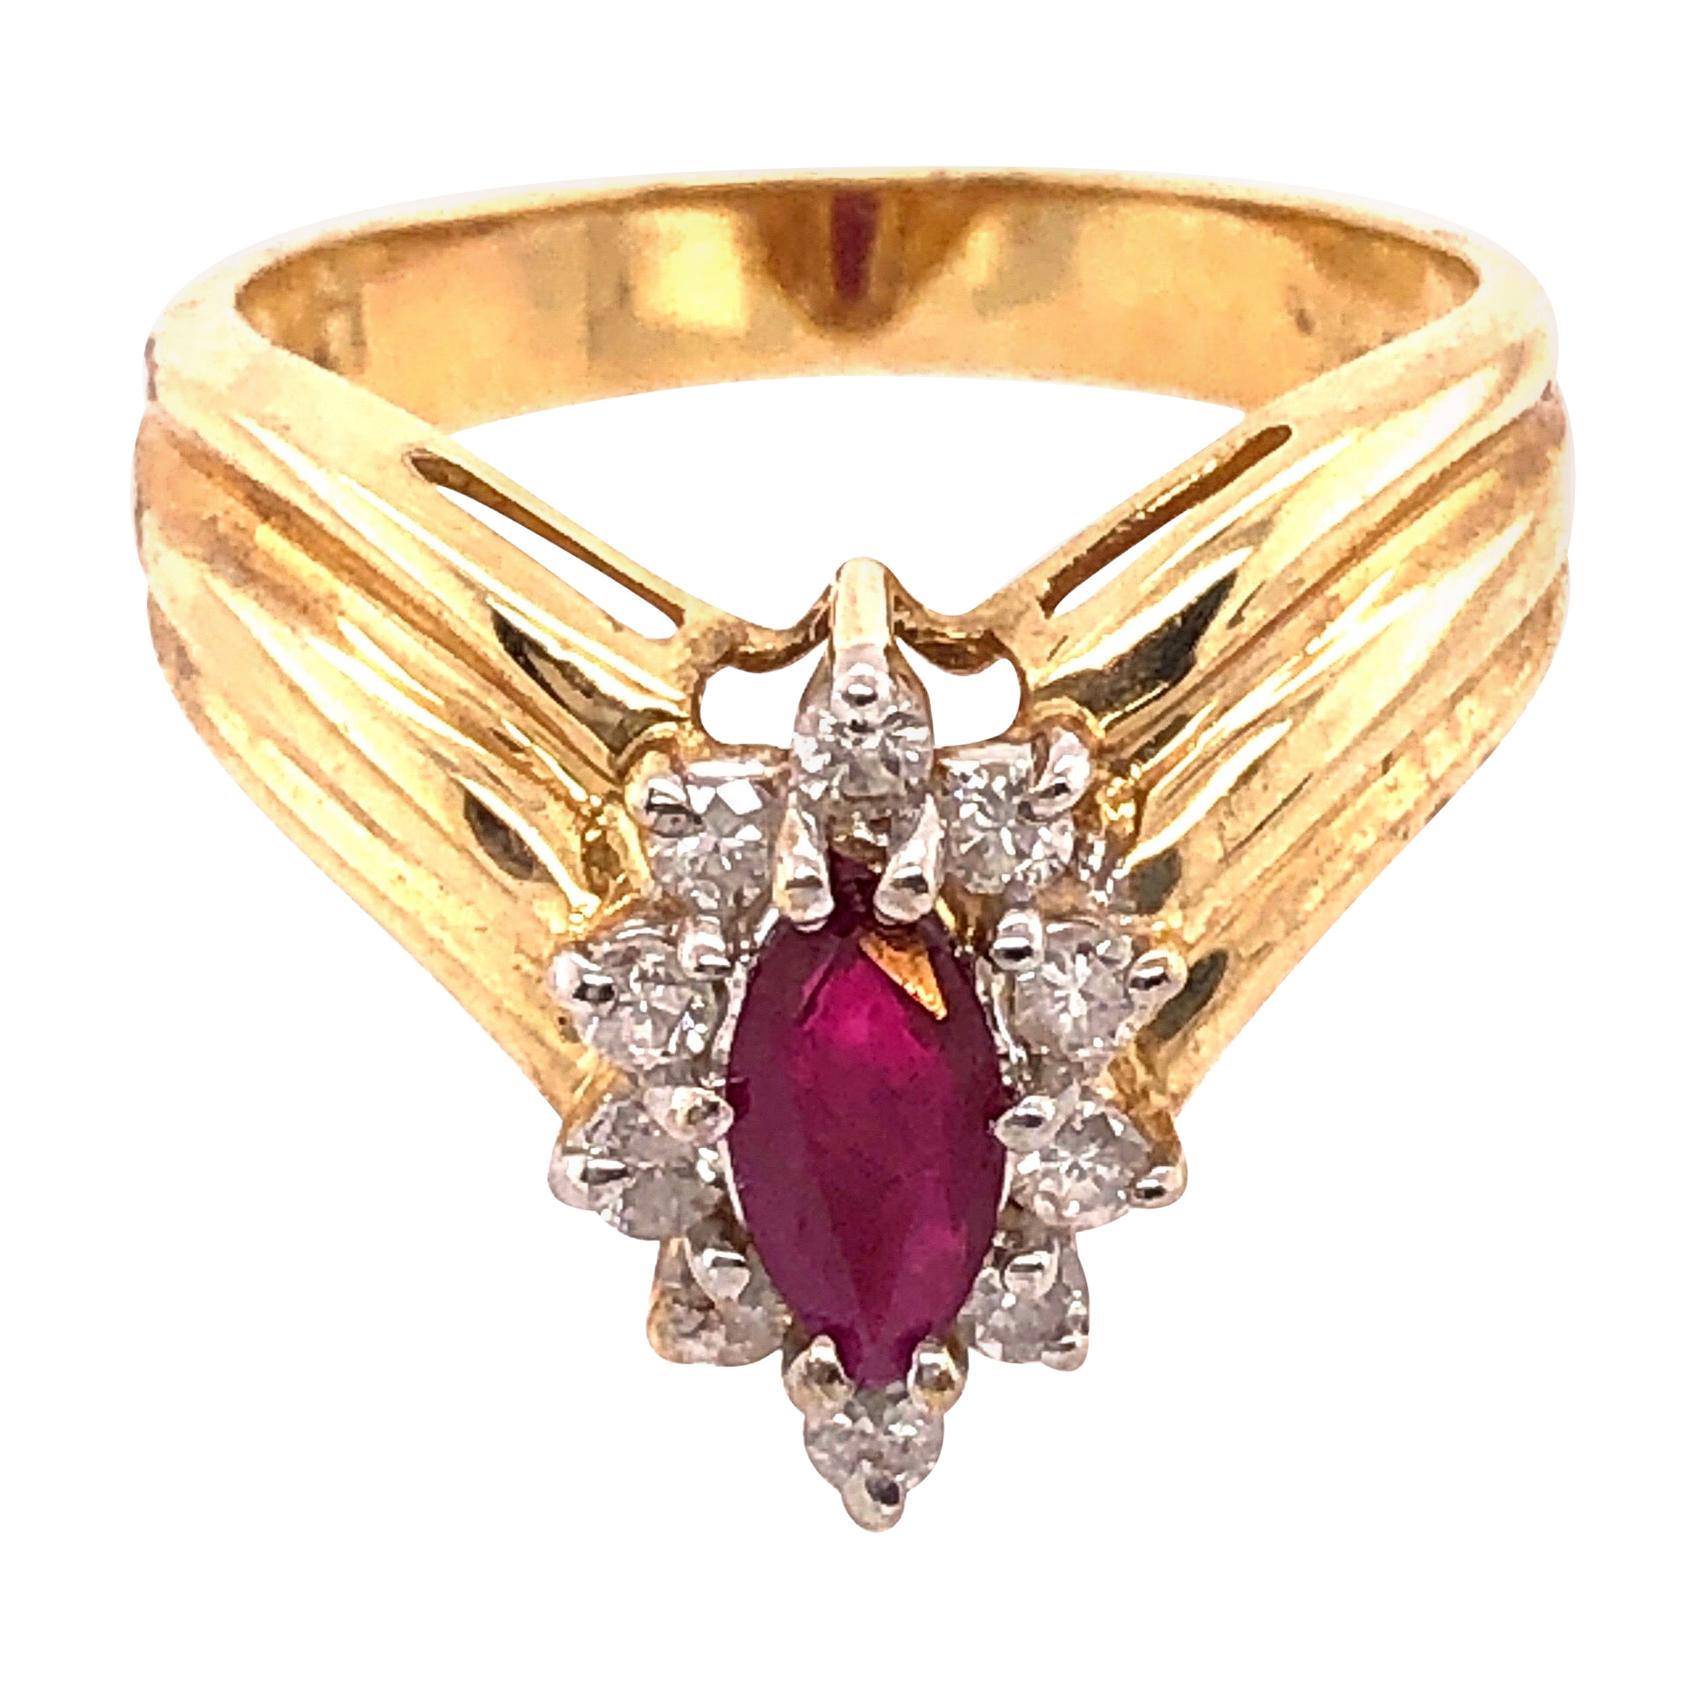 14 Karat Yellow and White Gold Ruby Ring with Diamond Accents 0.50 TDW